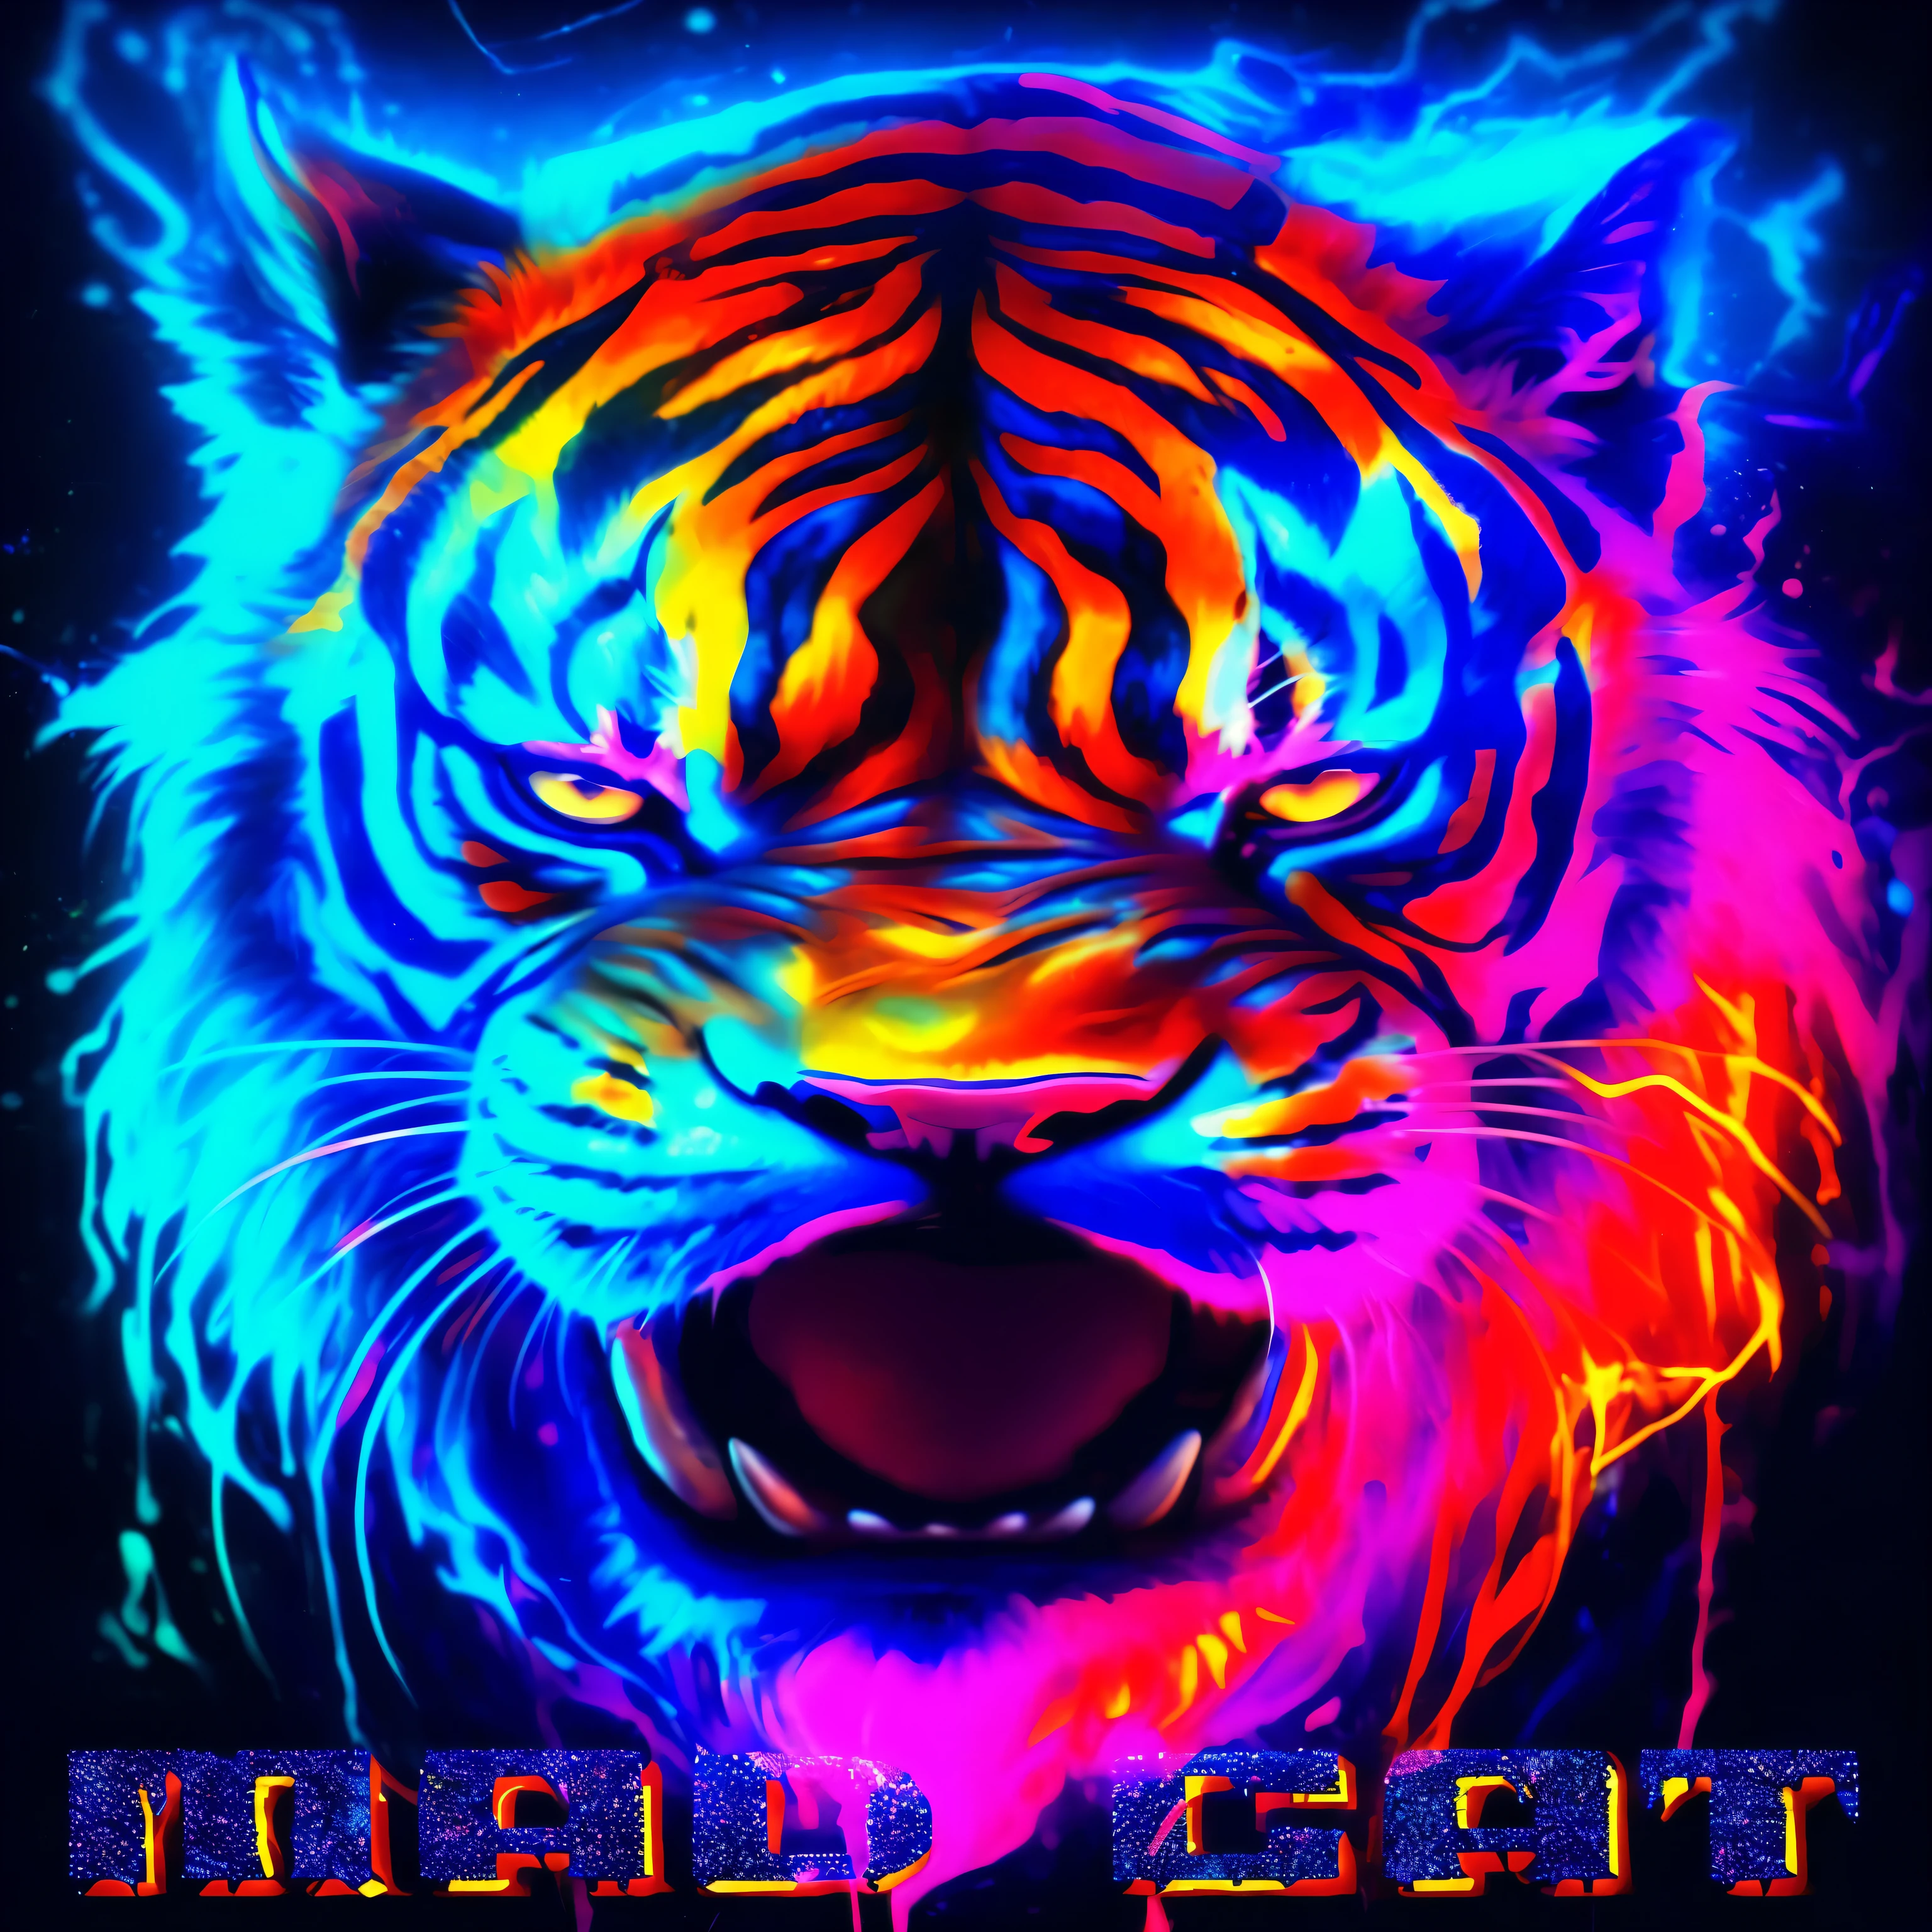 a close up of a tiger with a neon background, cosmic tiger, beautiful neon cats, amoled wallpaper, ultraviolet and neon colors, neon digital art, neon color bleed, ((tiger)), tiger_beast, neon art style, vivid glowing colors, tiger, phone wallpaper hd, bright colors highly detailed, colorful high contrast hd, trippy vibrant colors, hd phone wallpaper